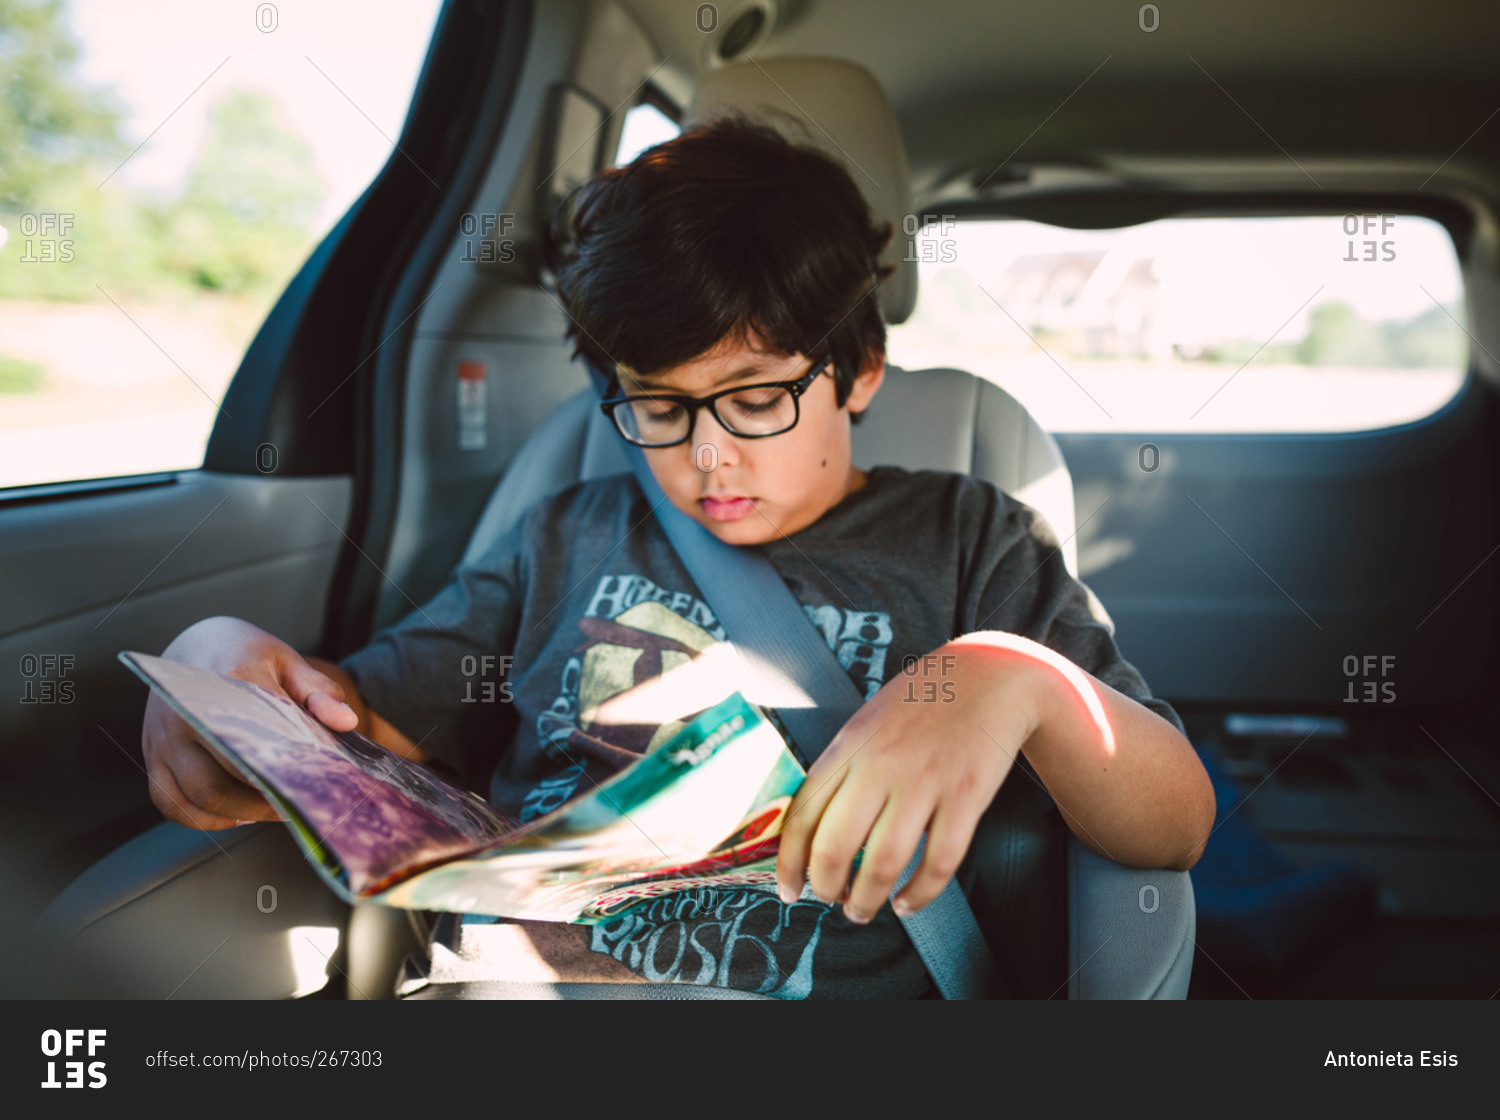 A boy reads a magazine in the back of a minivan